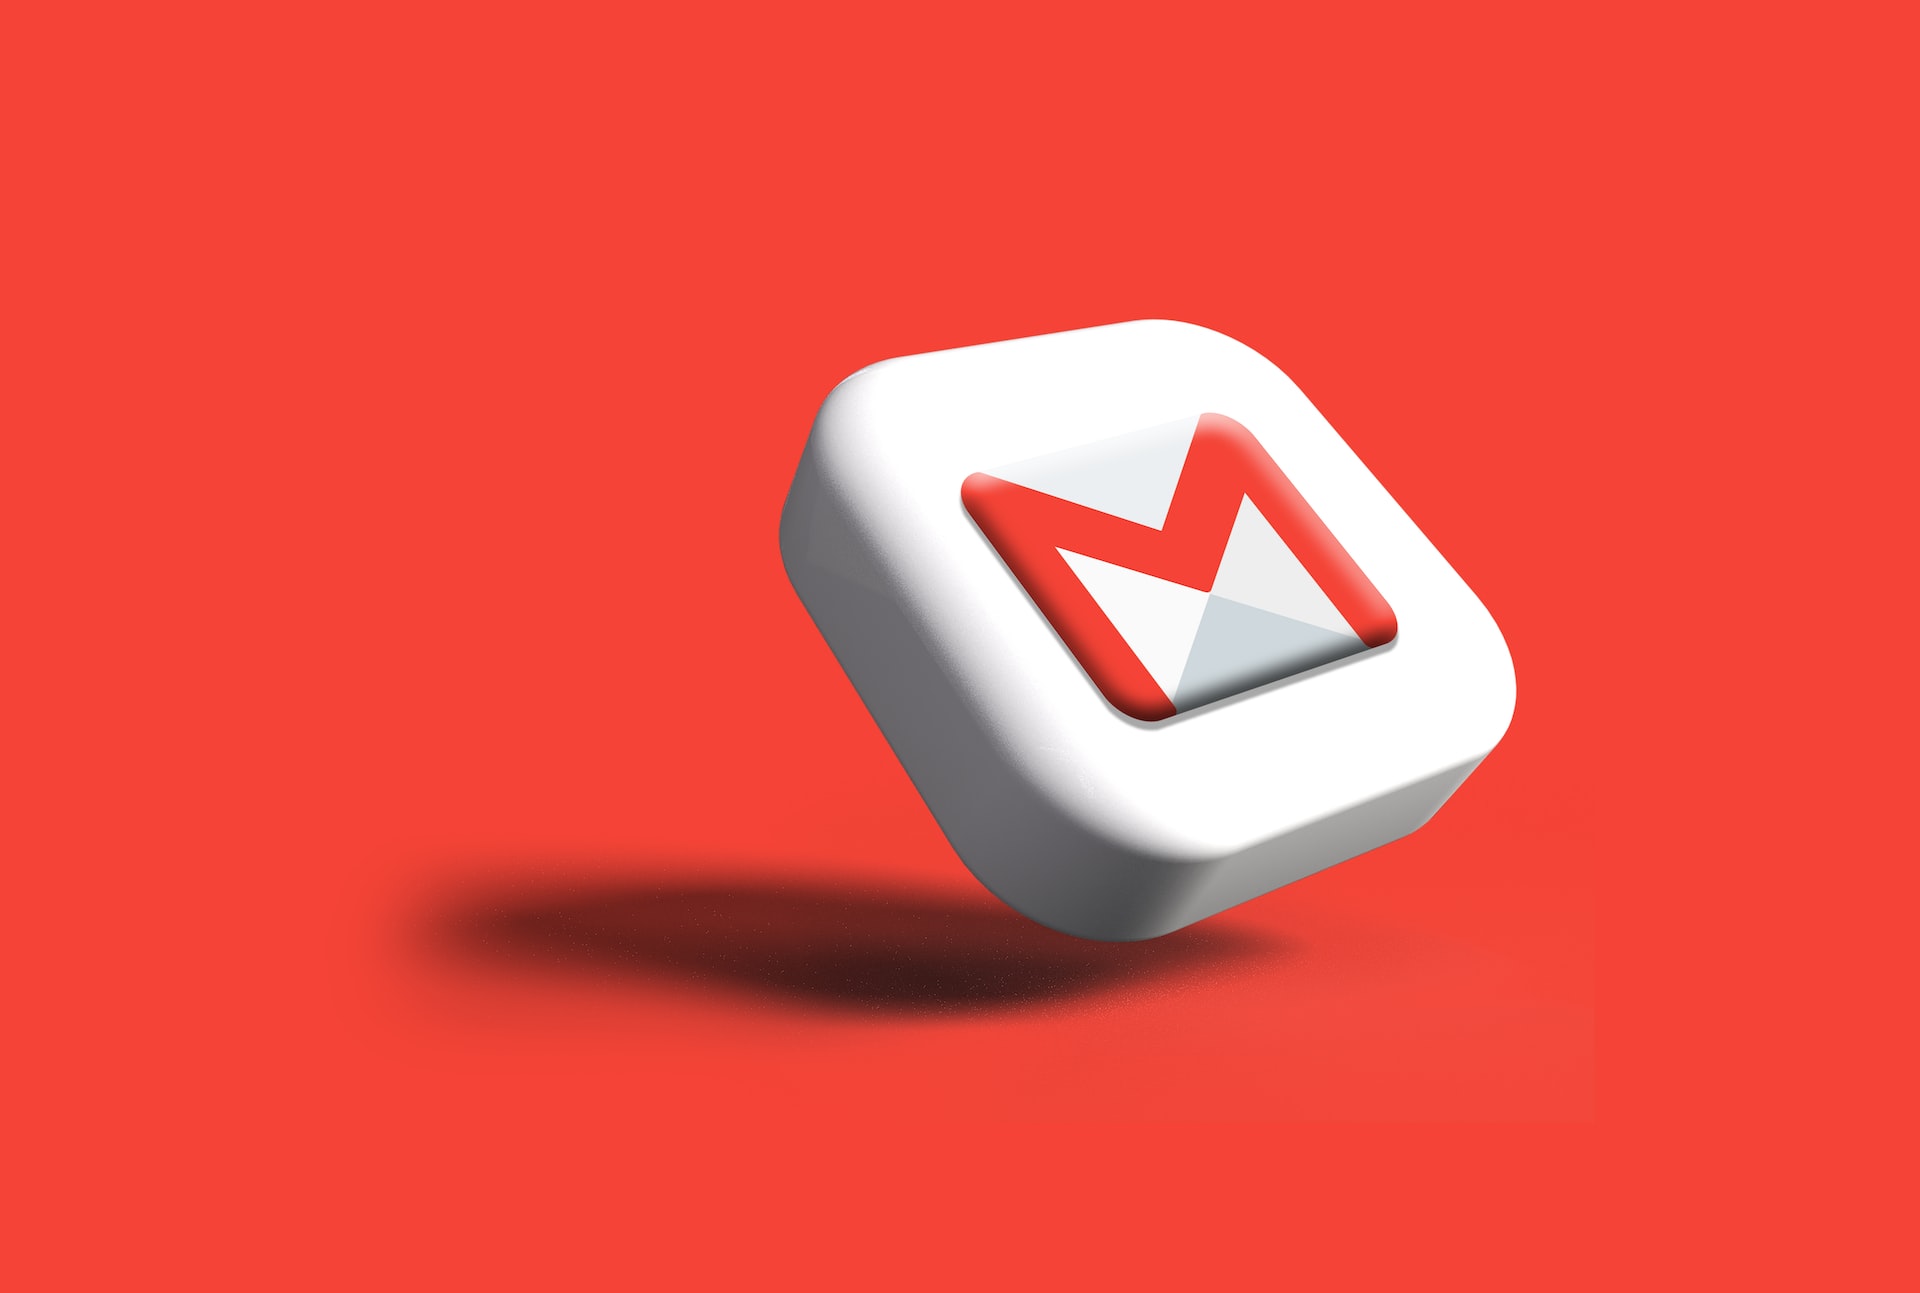 Need a Helpful Gmail App for Windows 10? Here’s 6